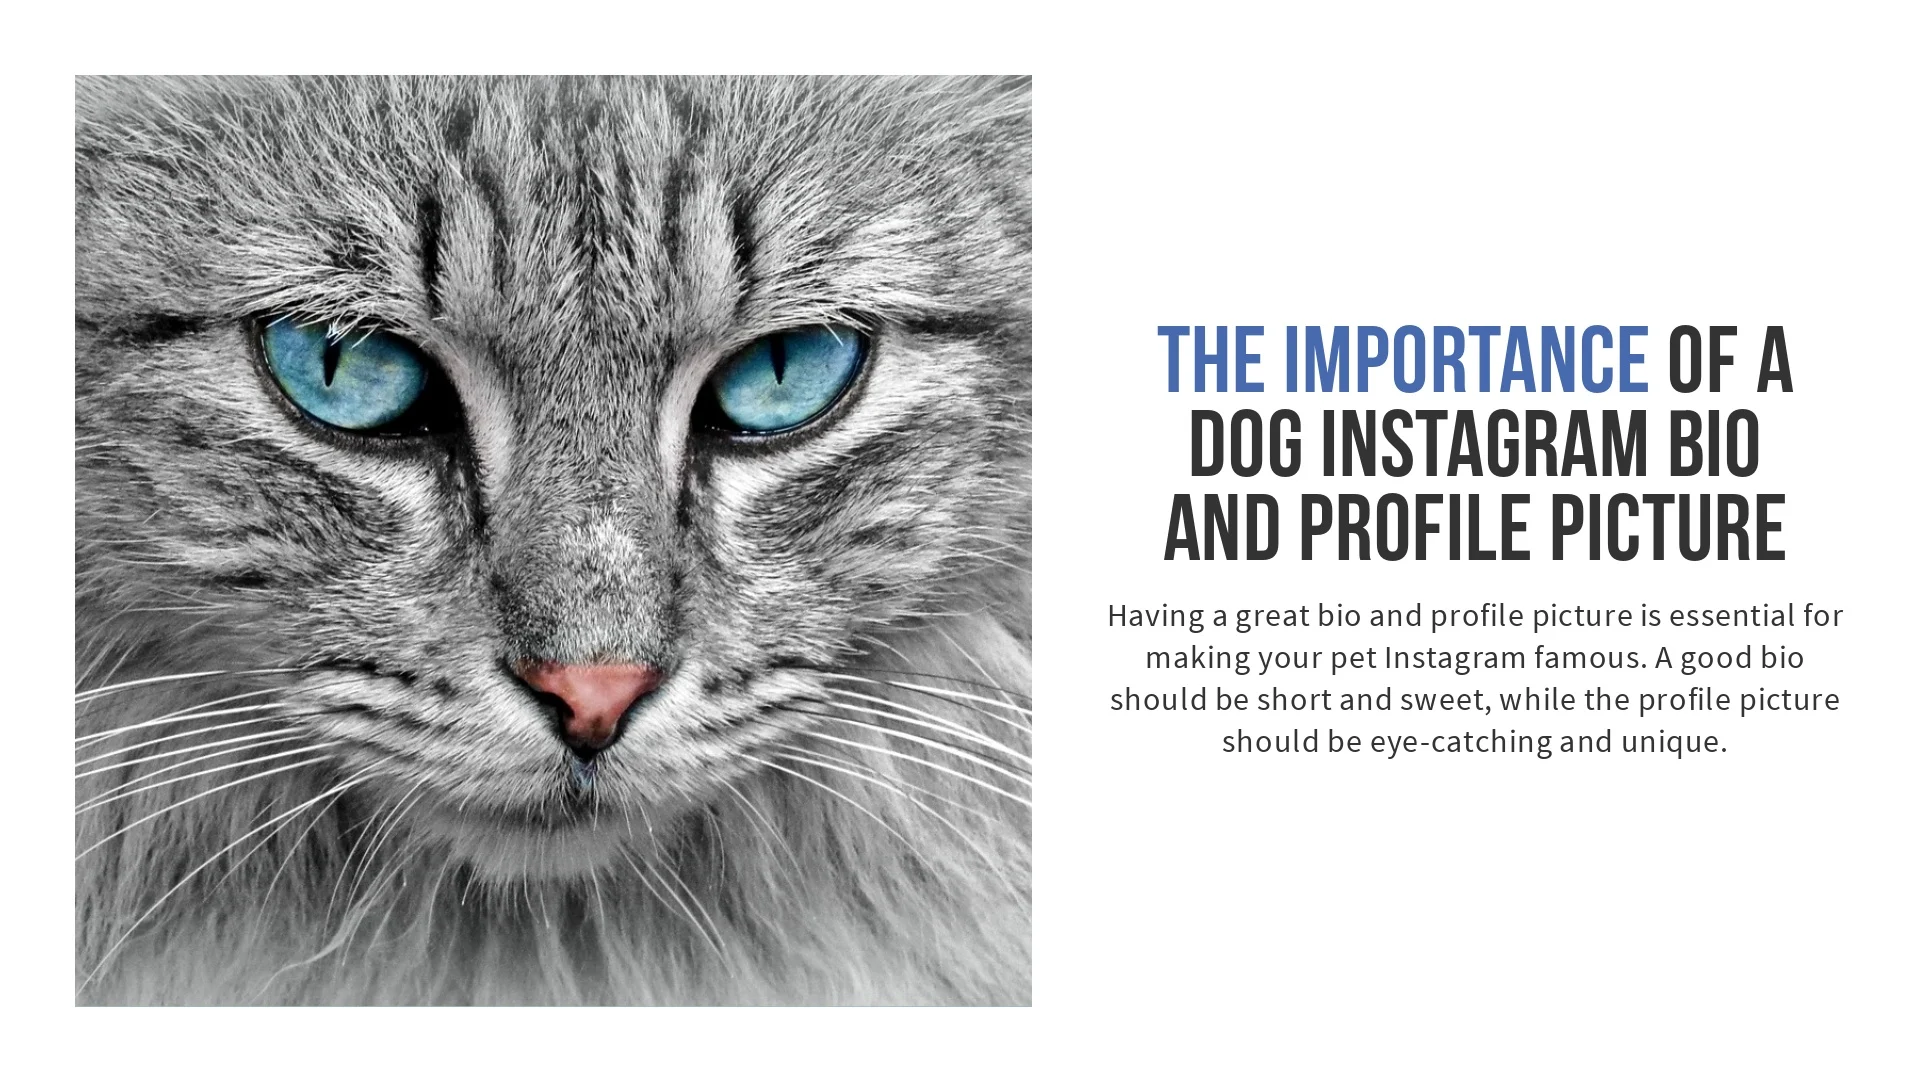 The importance of a profile picture explained via split image of a cat and text on the right.